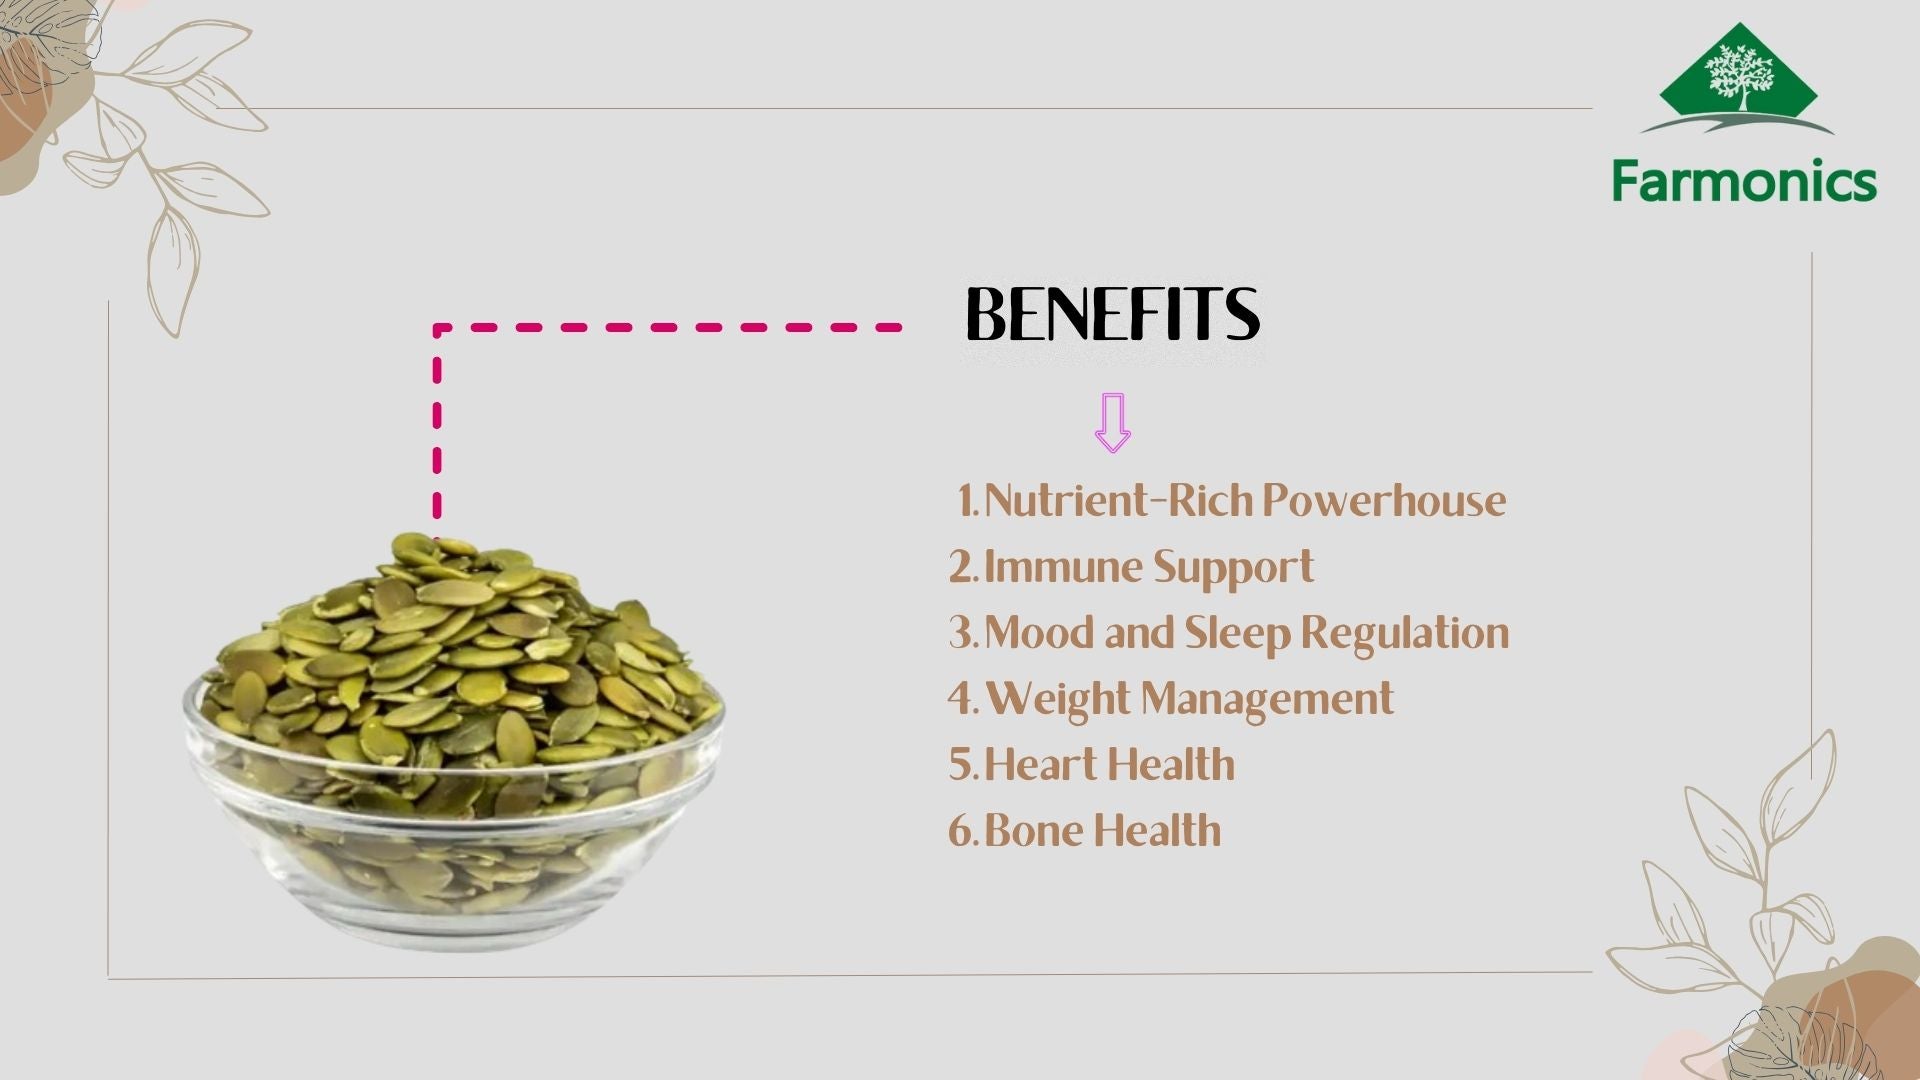 heer are the llist of benefits you cana avail from Farmonics premium quality pumpkin seeds